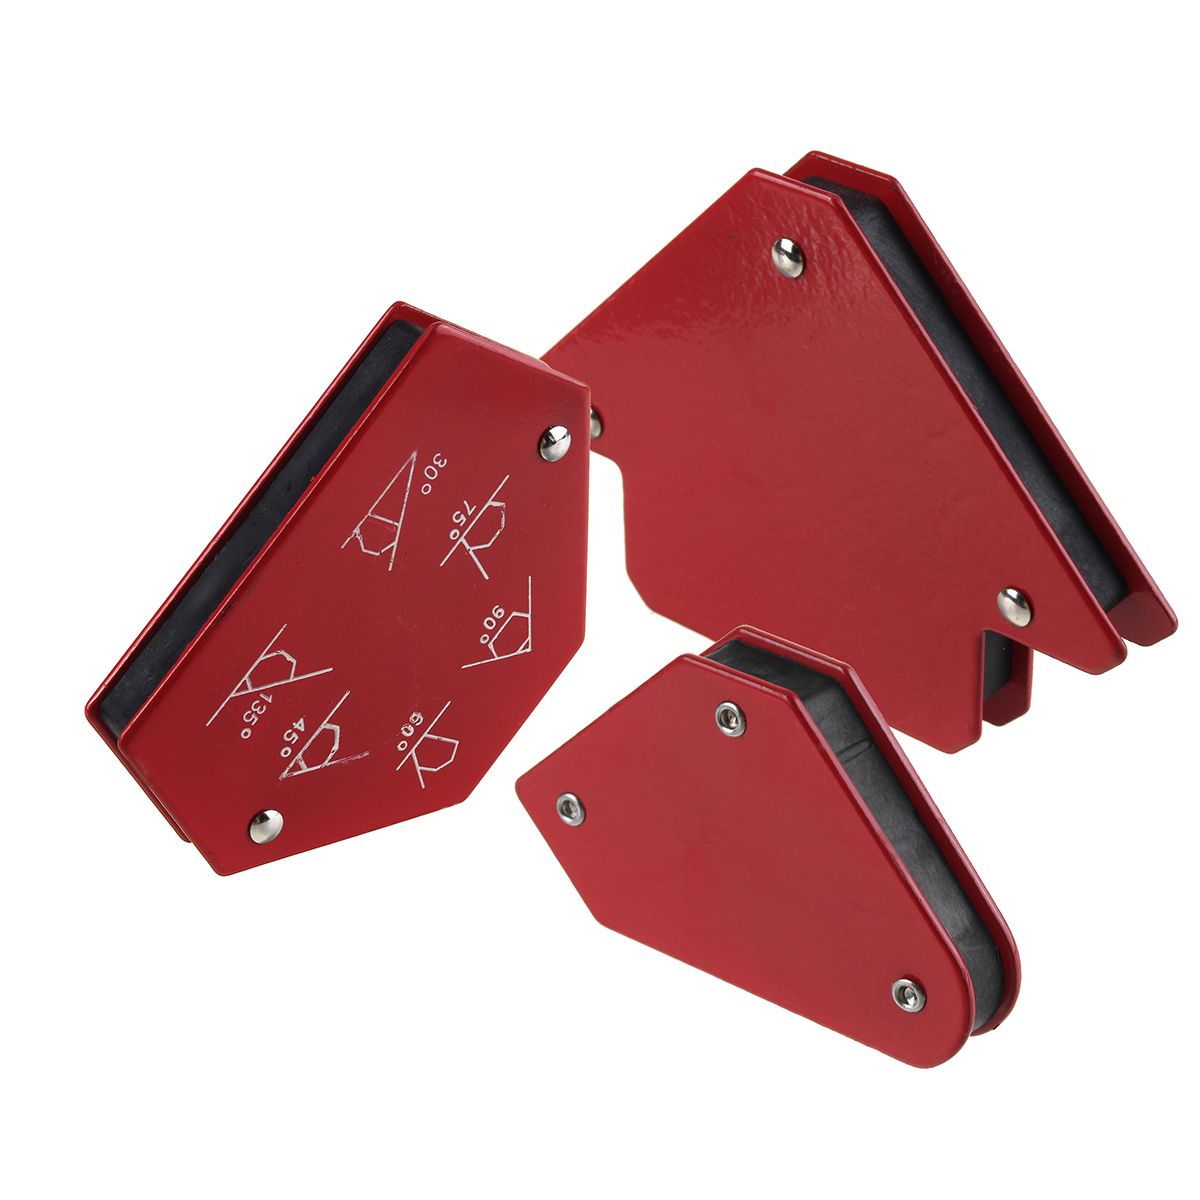 6Pcs-Triangle-Welding-Positioner-Magnetic-Fixed-Angle-Soldering-Locator-Tools-Without-Switch-Welding-1757937-6